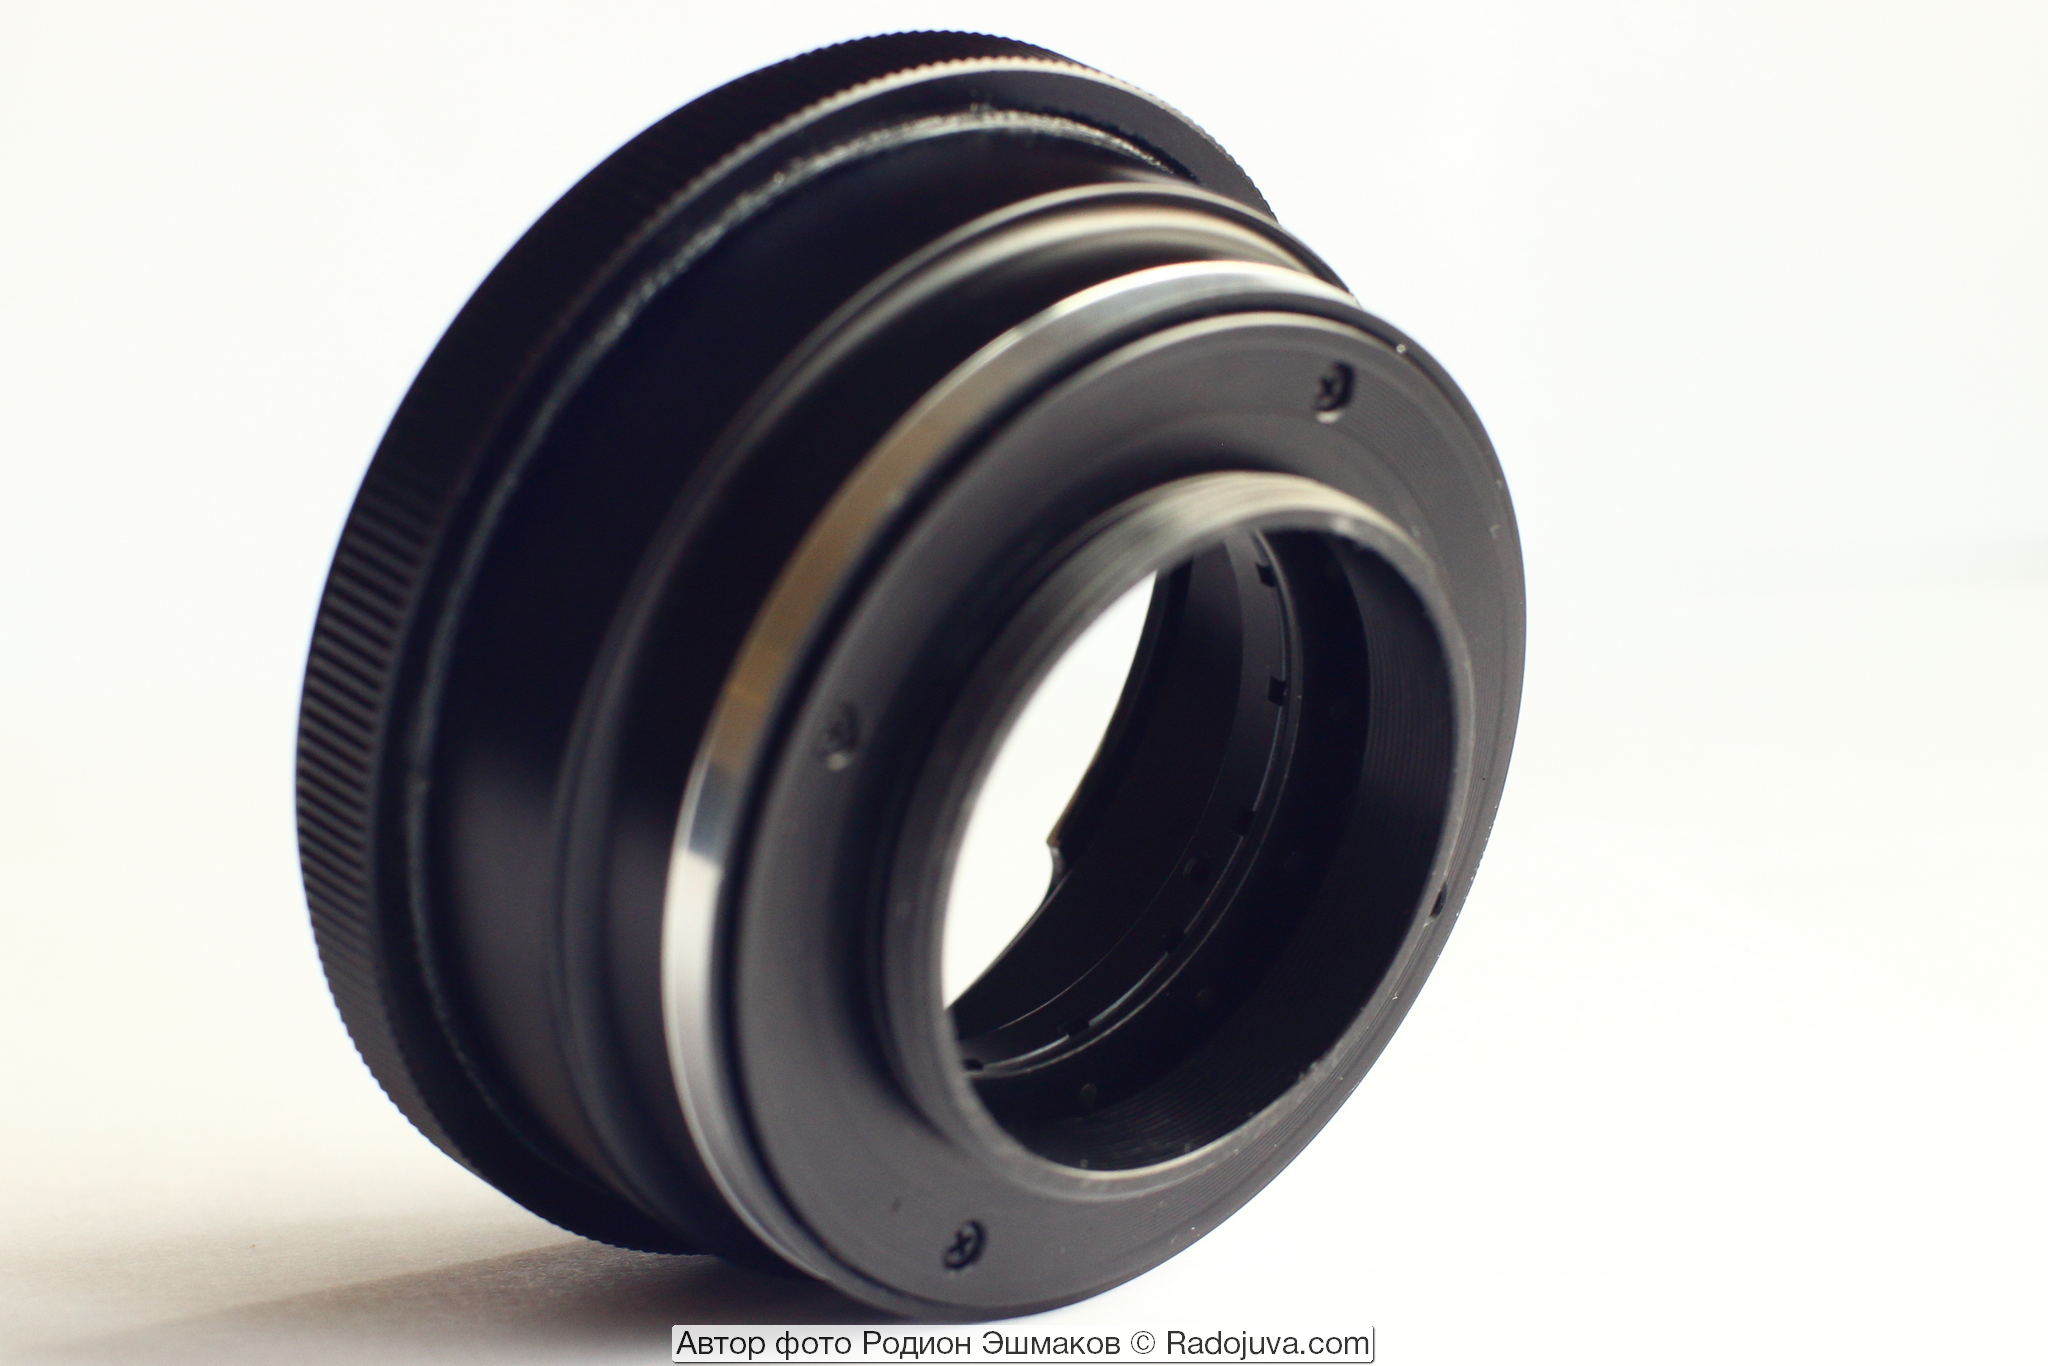 Photo of P6-M42 adapter with integrated diaphragm